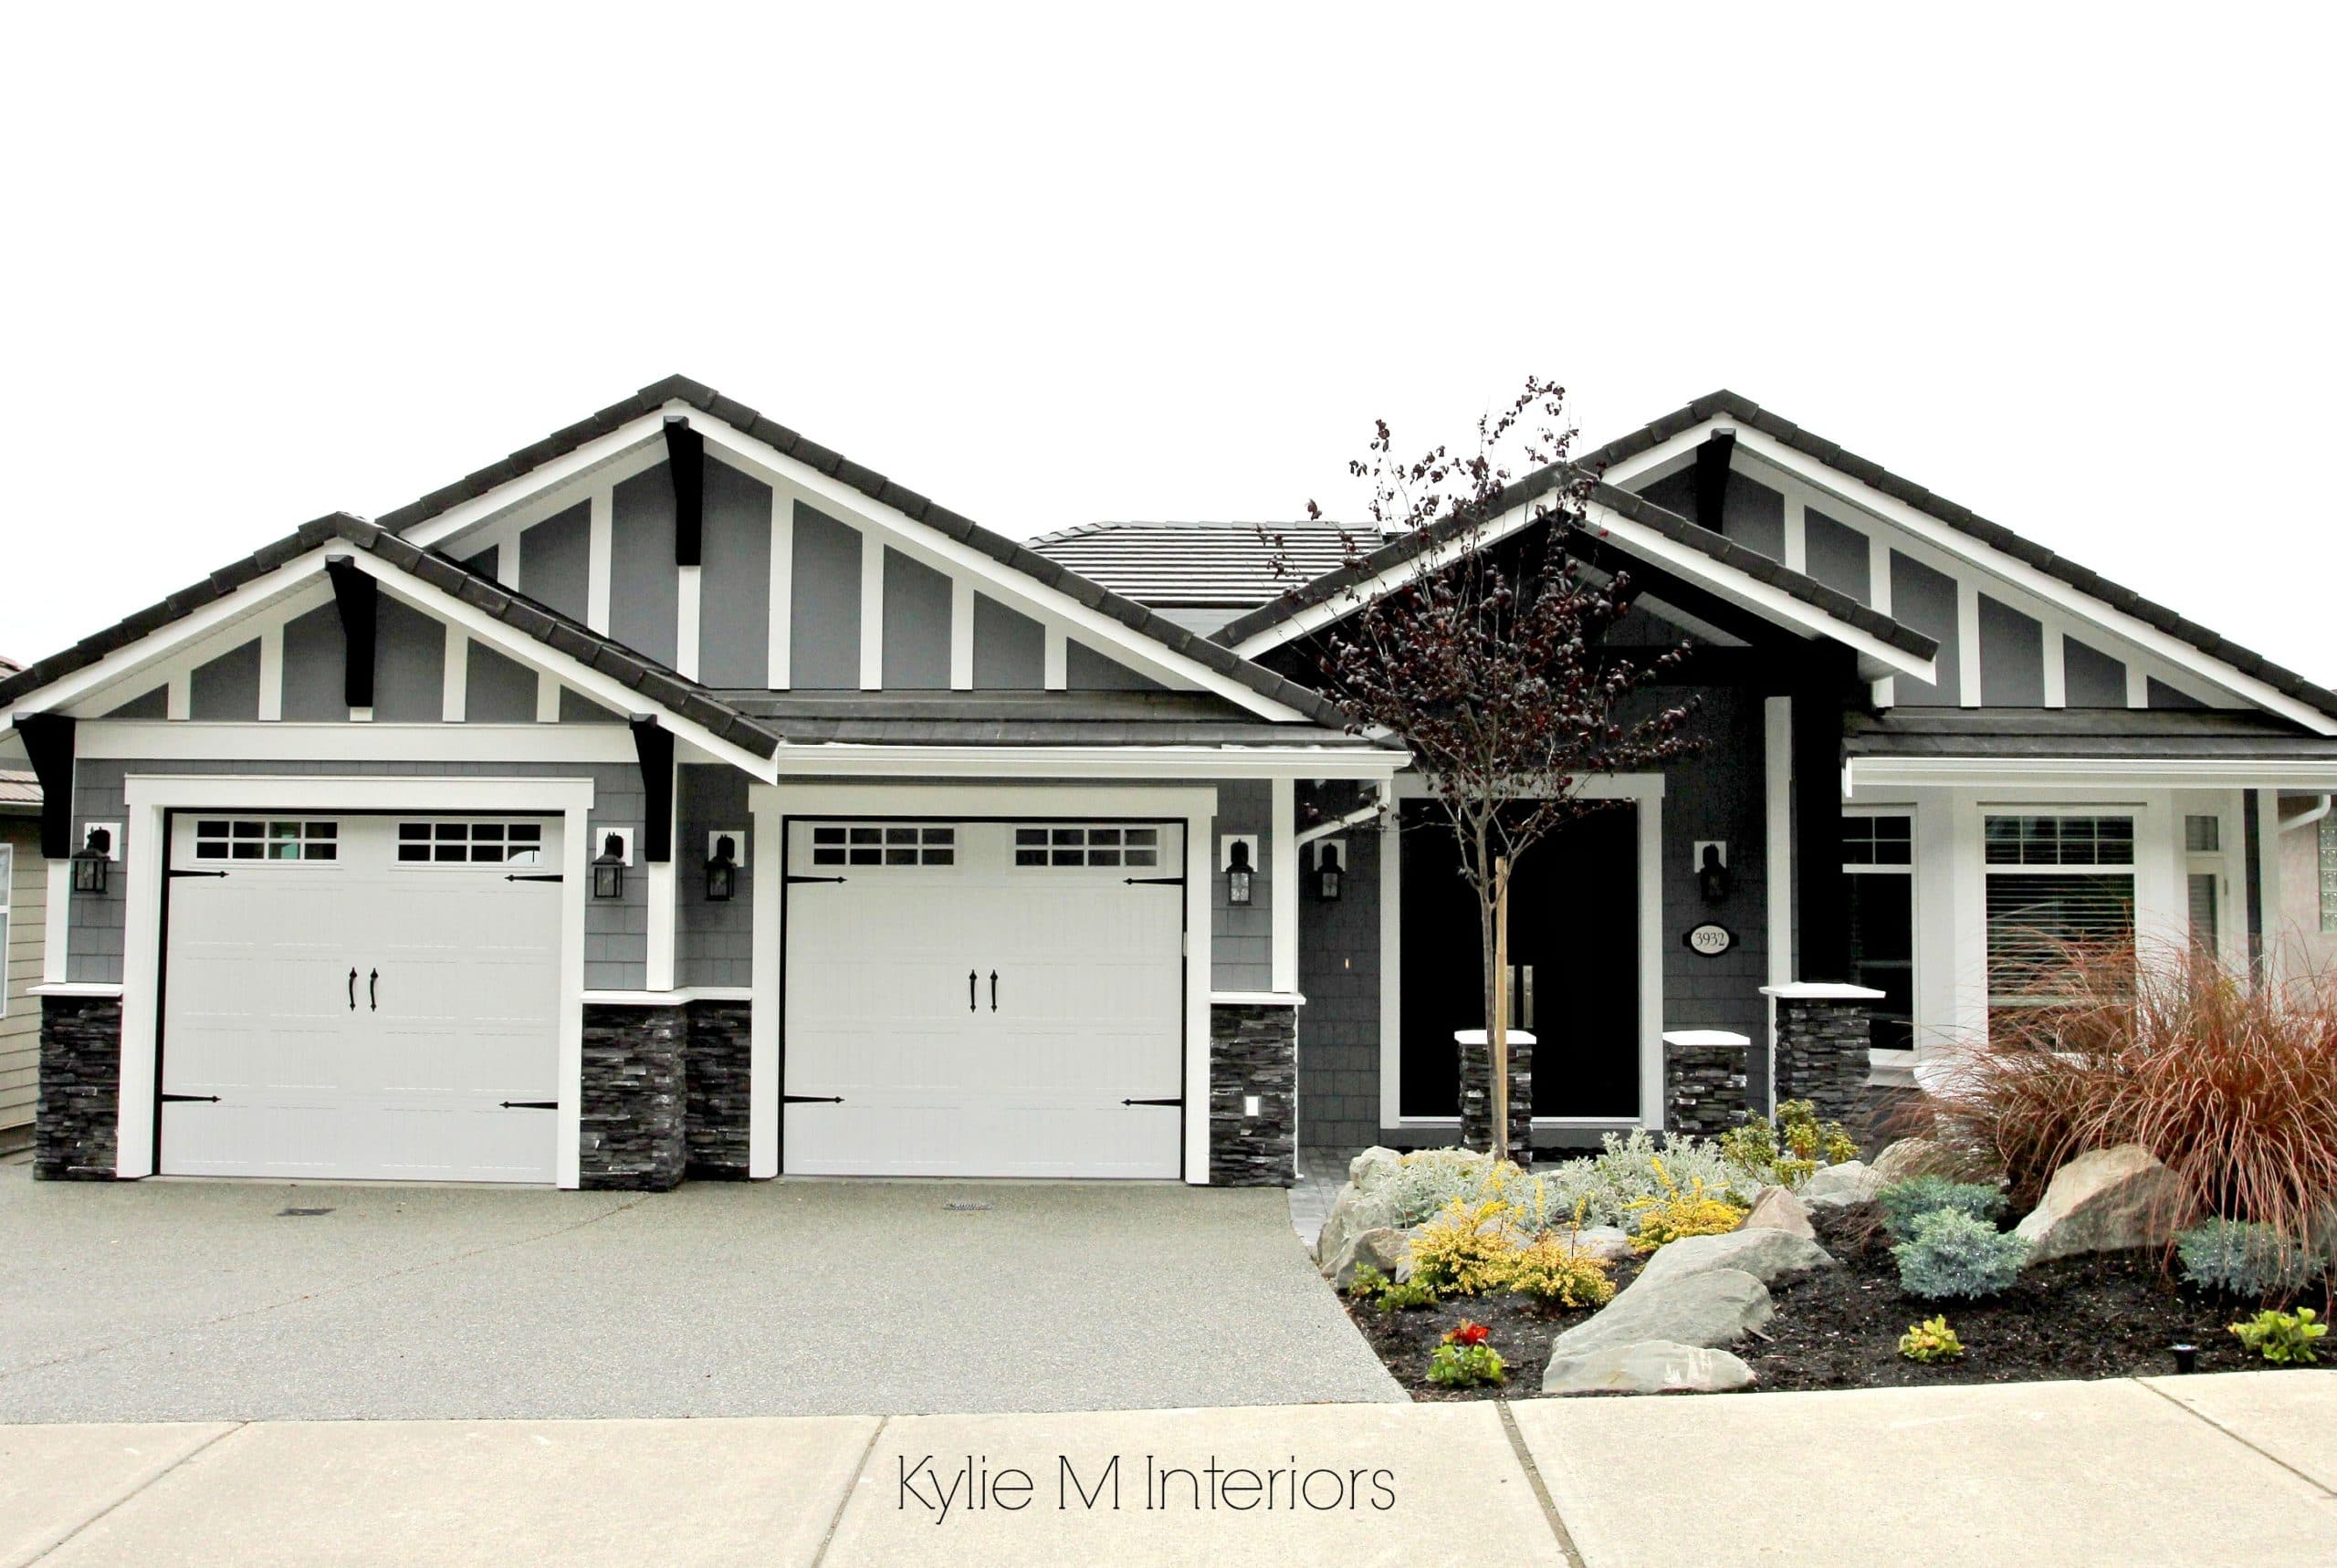 E-decor, online decorating, design and color consulting with Kylie M Interiors. Exterior paint colours including shutters, siding, trim, gables and more